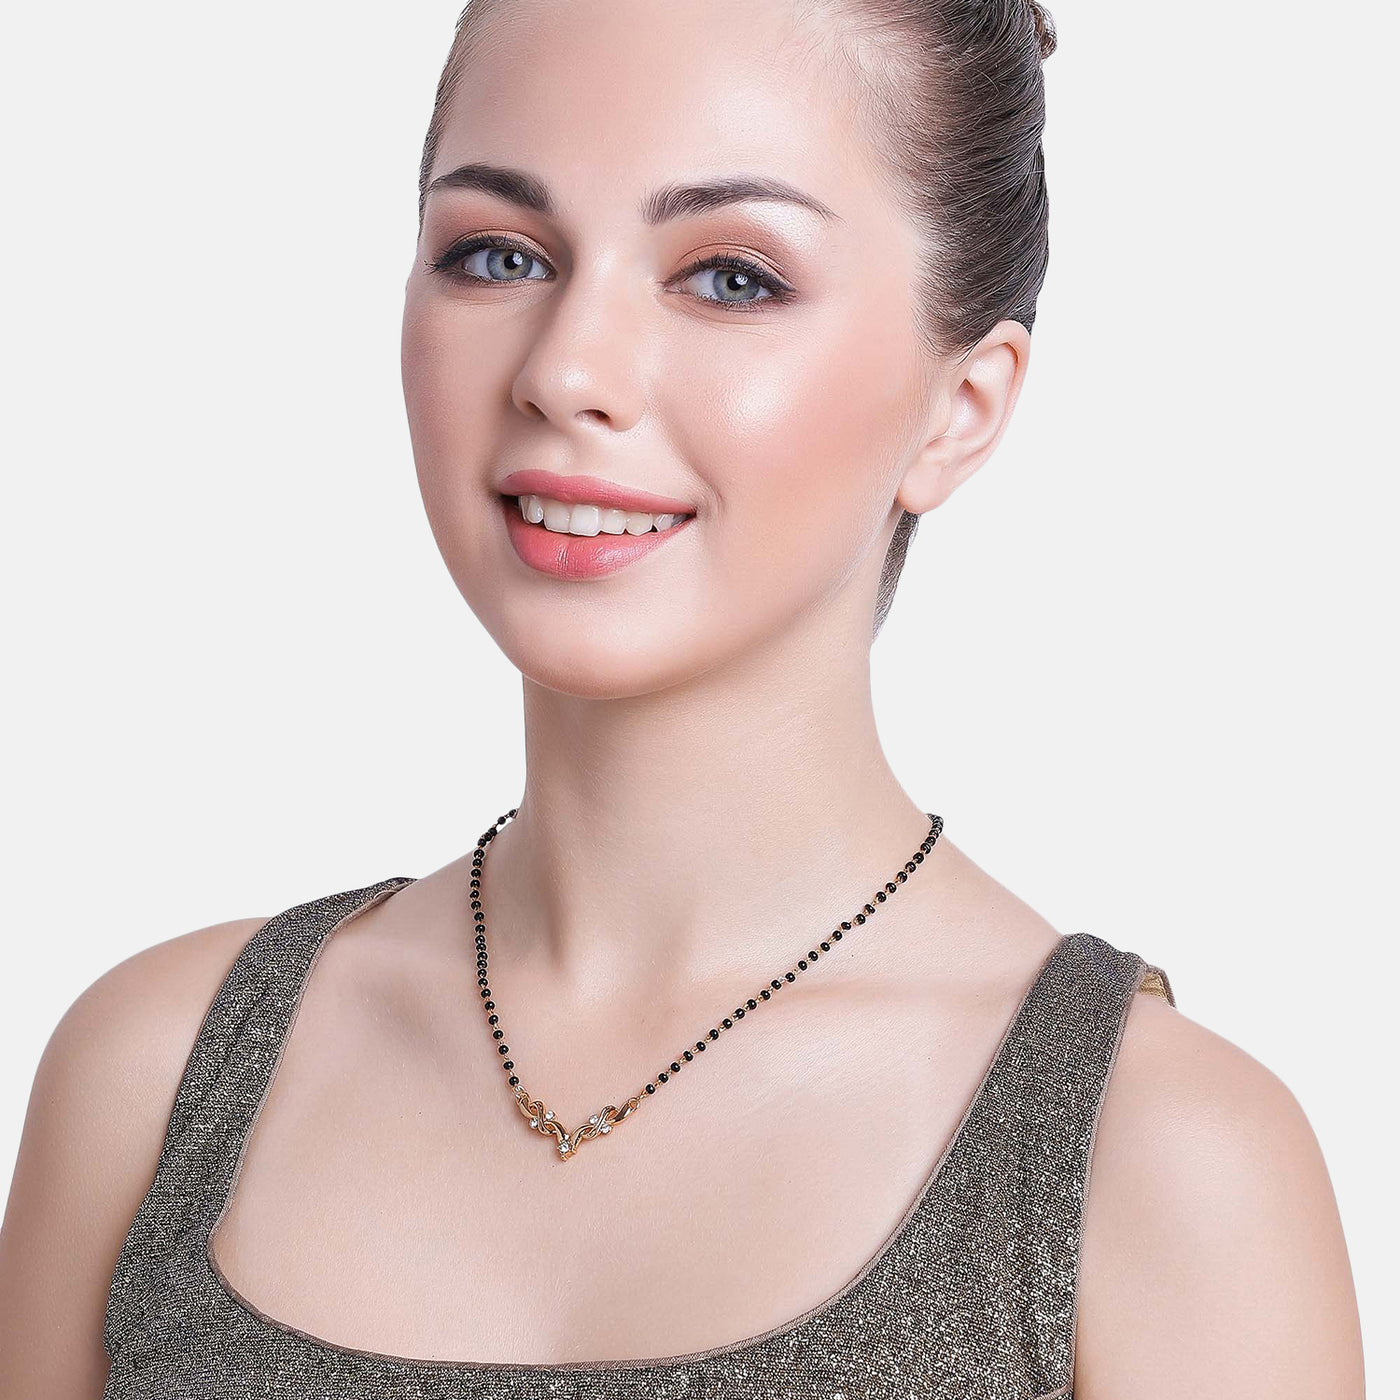 Estele Gold Plated Ravishing Mangalsutra Necklace with Austrian Crystals for Women